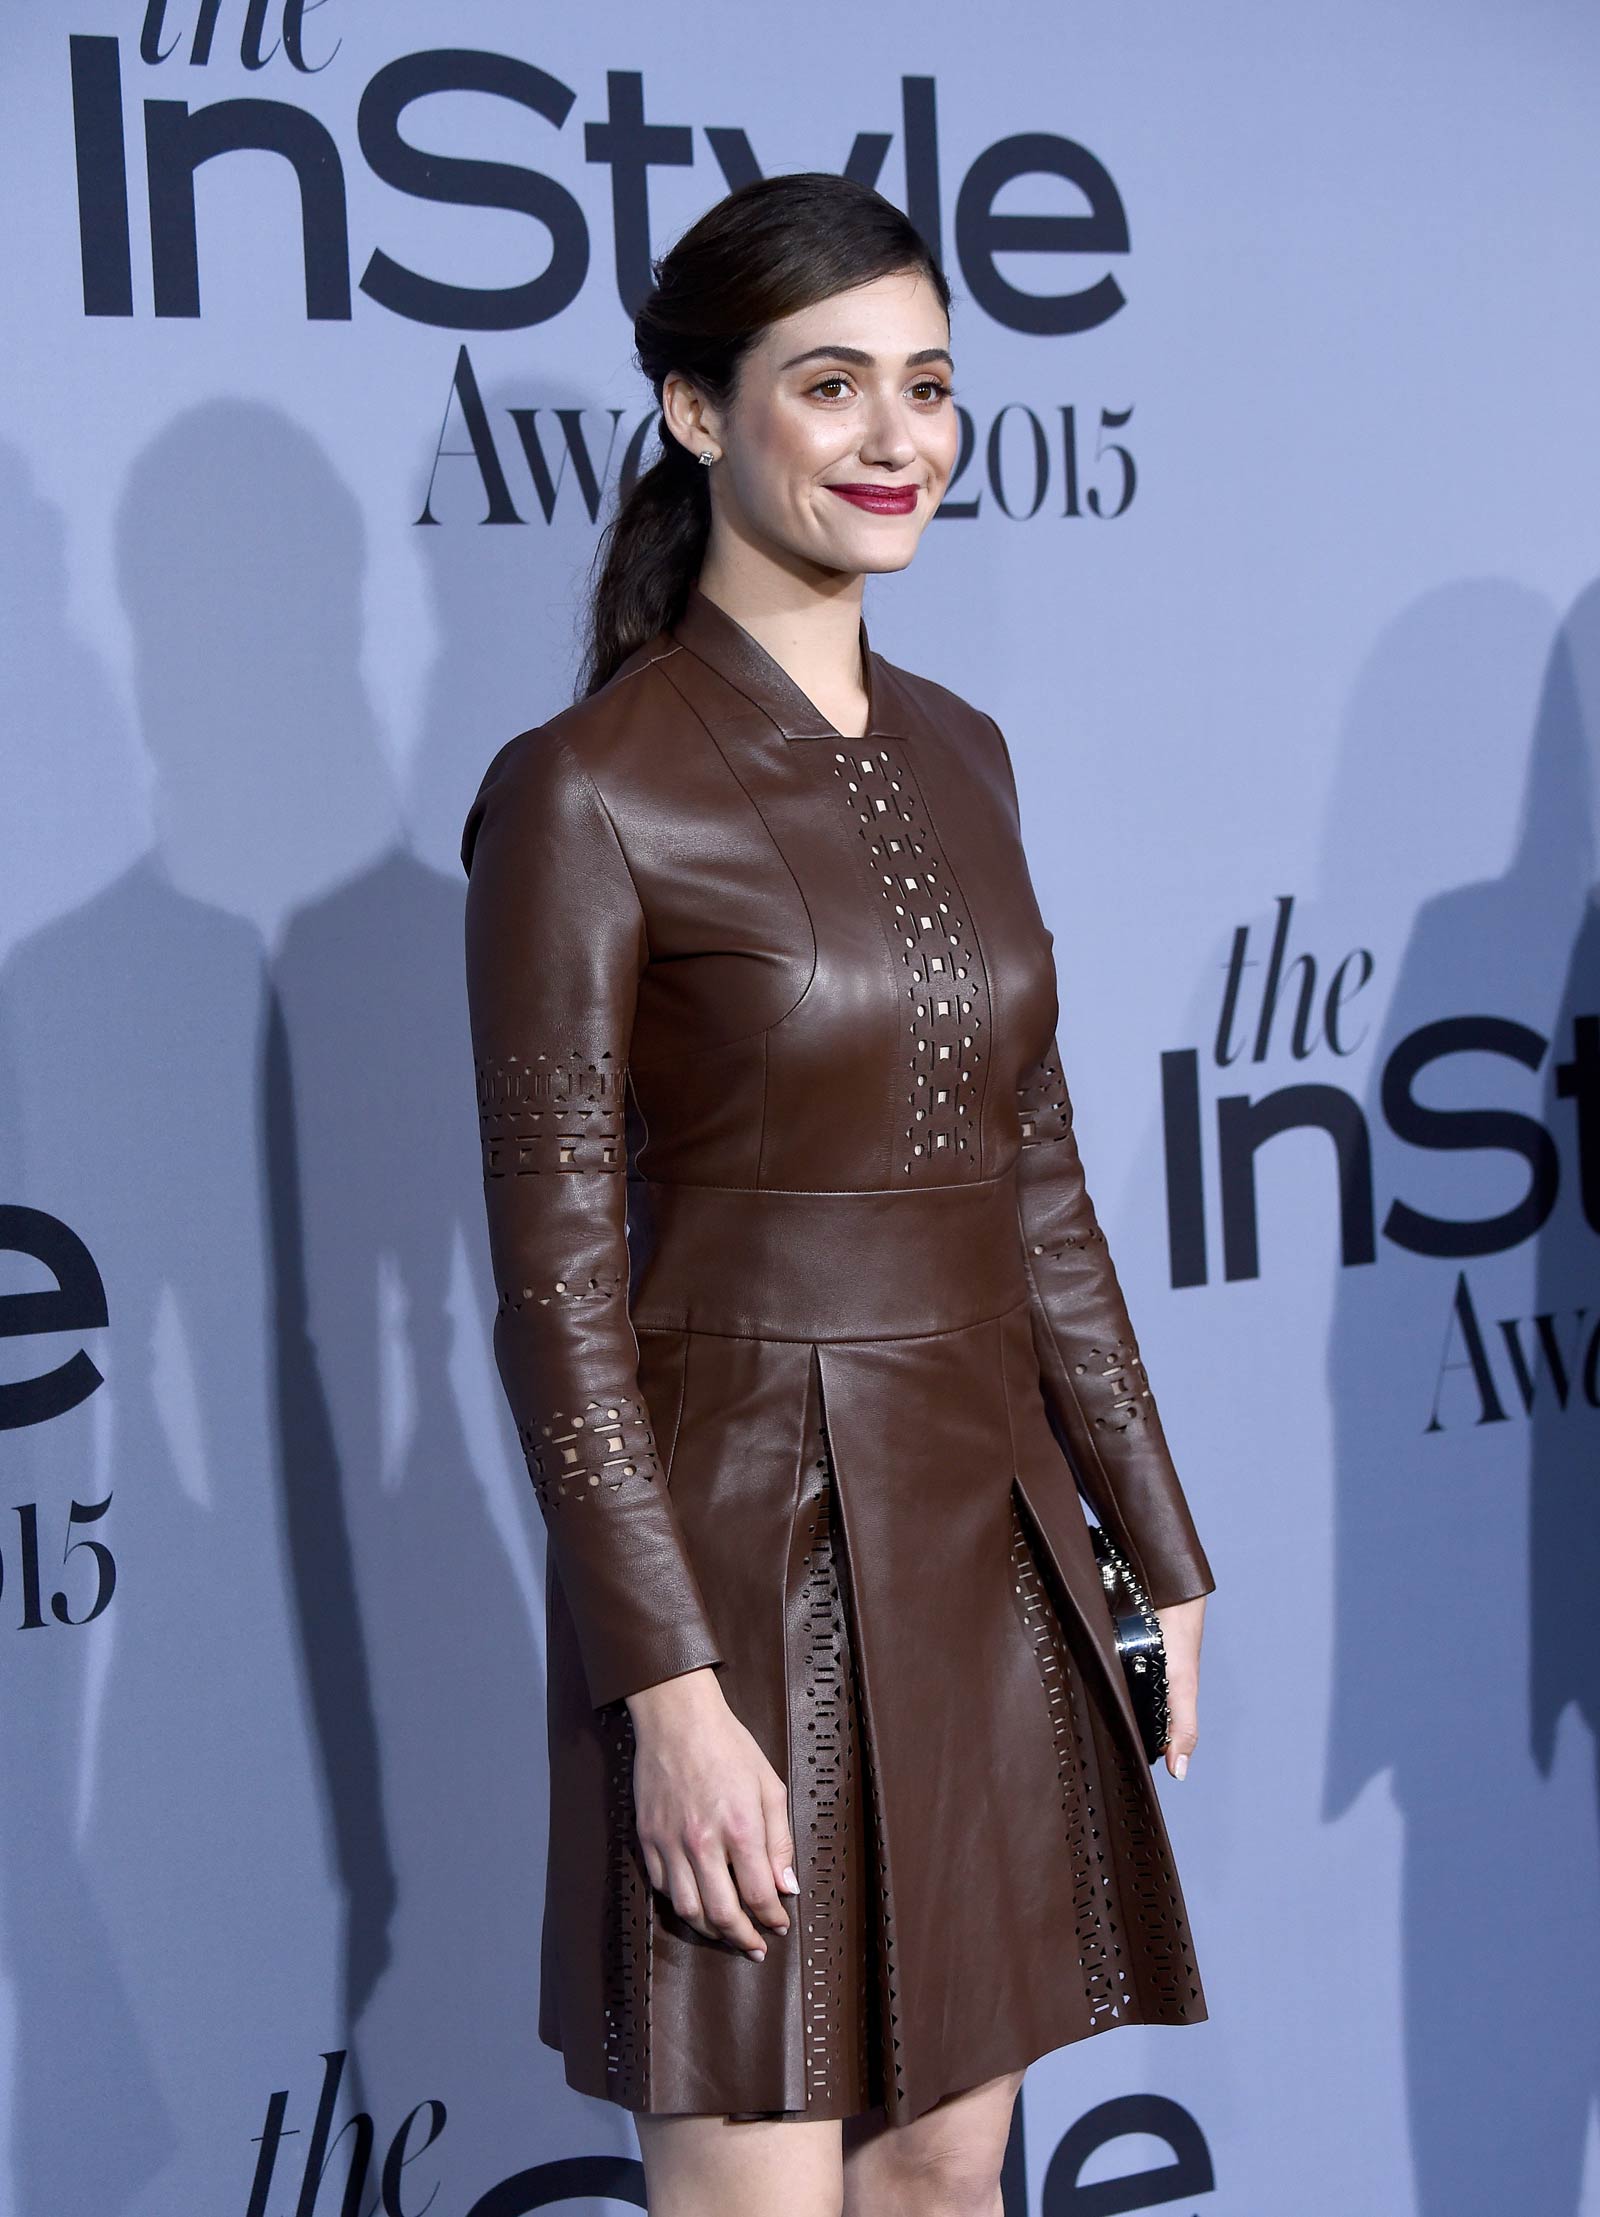 Emmy Rossum attends InStyle Awards